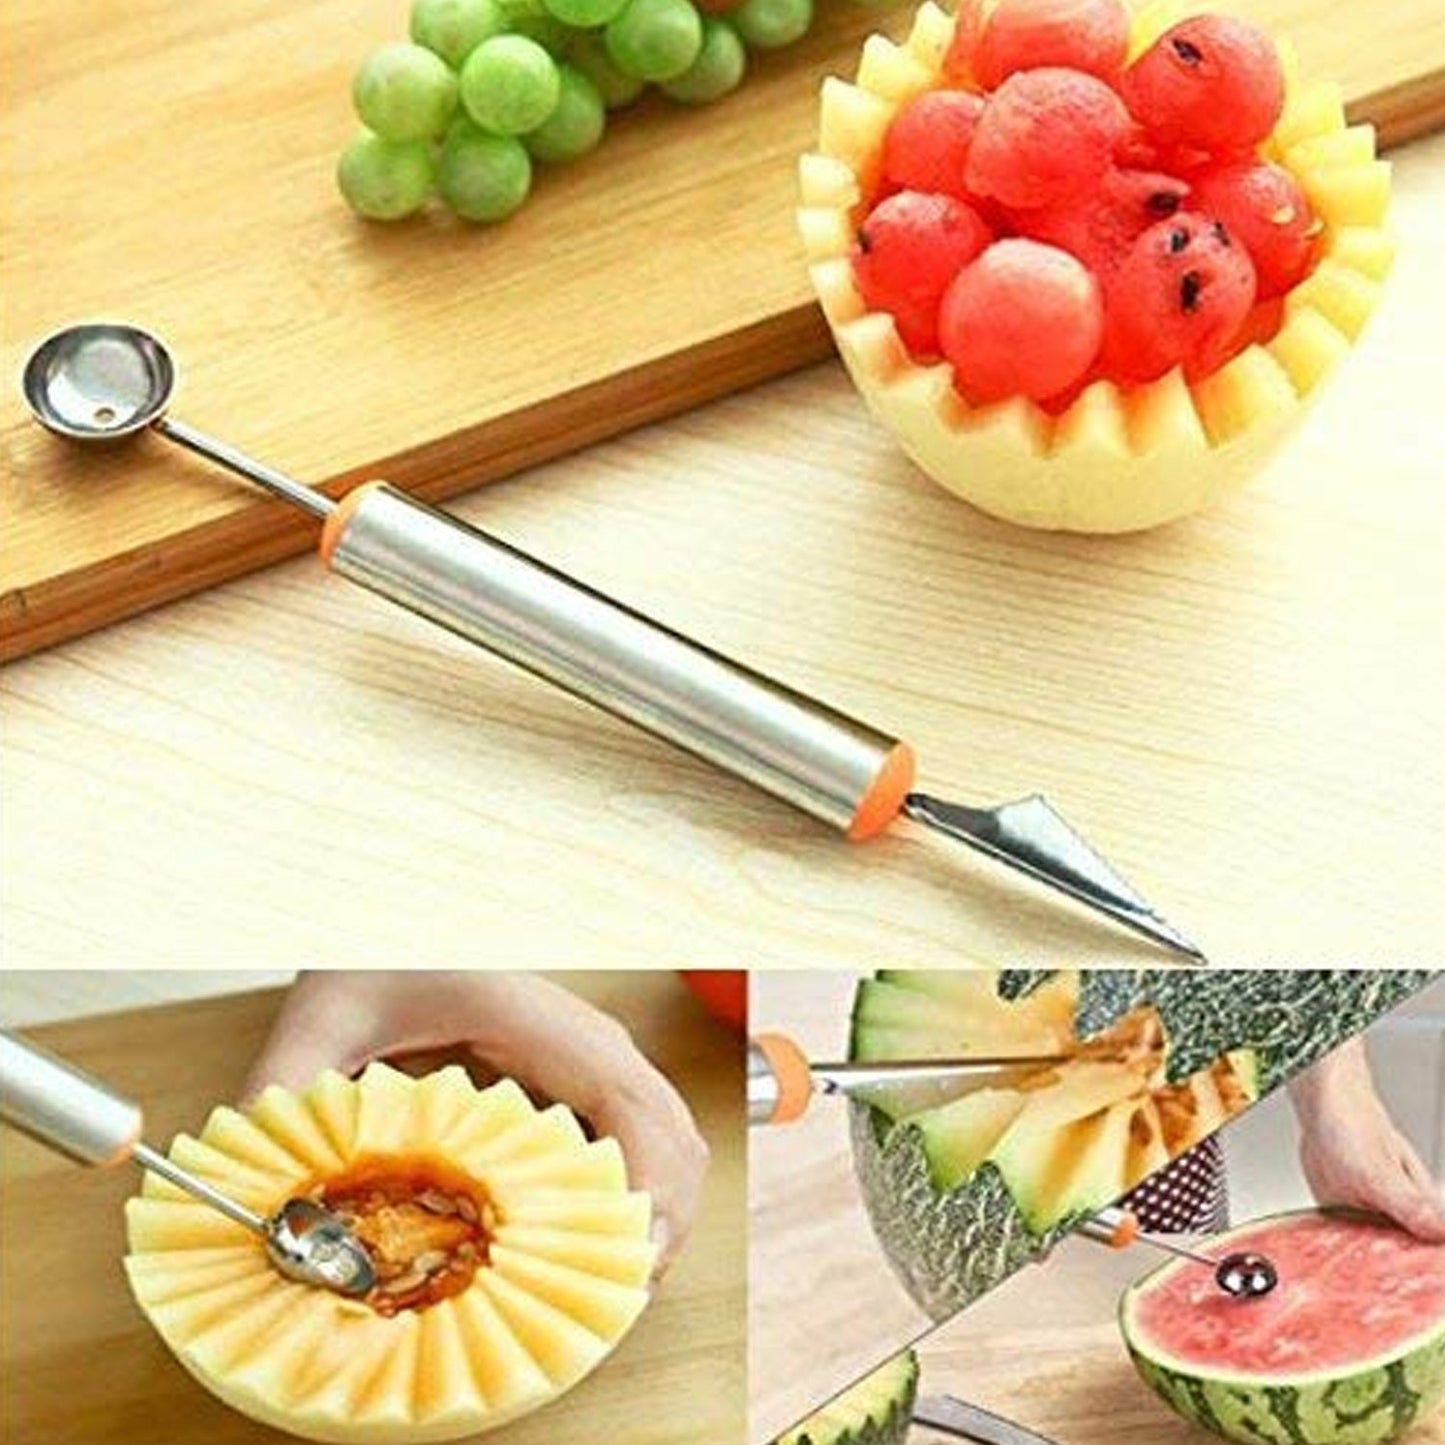 5335 Multifunctional 2 in 1 Melon Baller - Stainless Steel Dig Scoop with Fruit Carving Knife. 